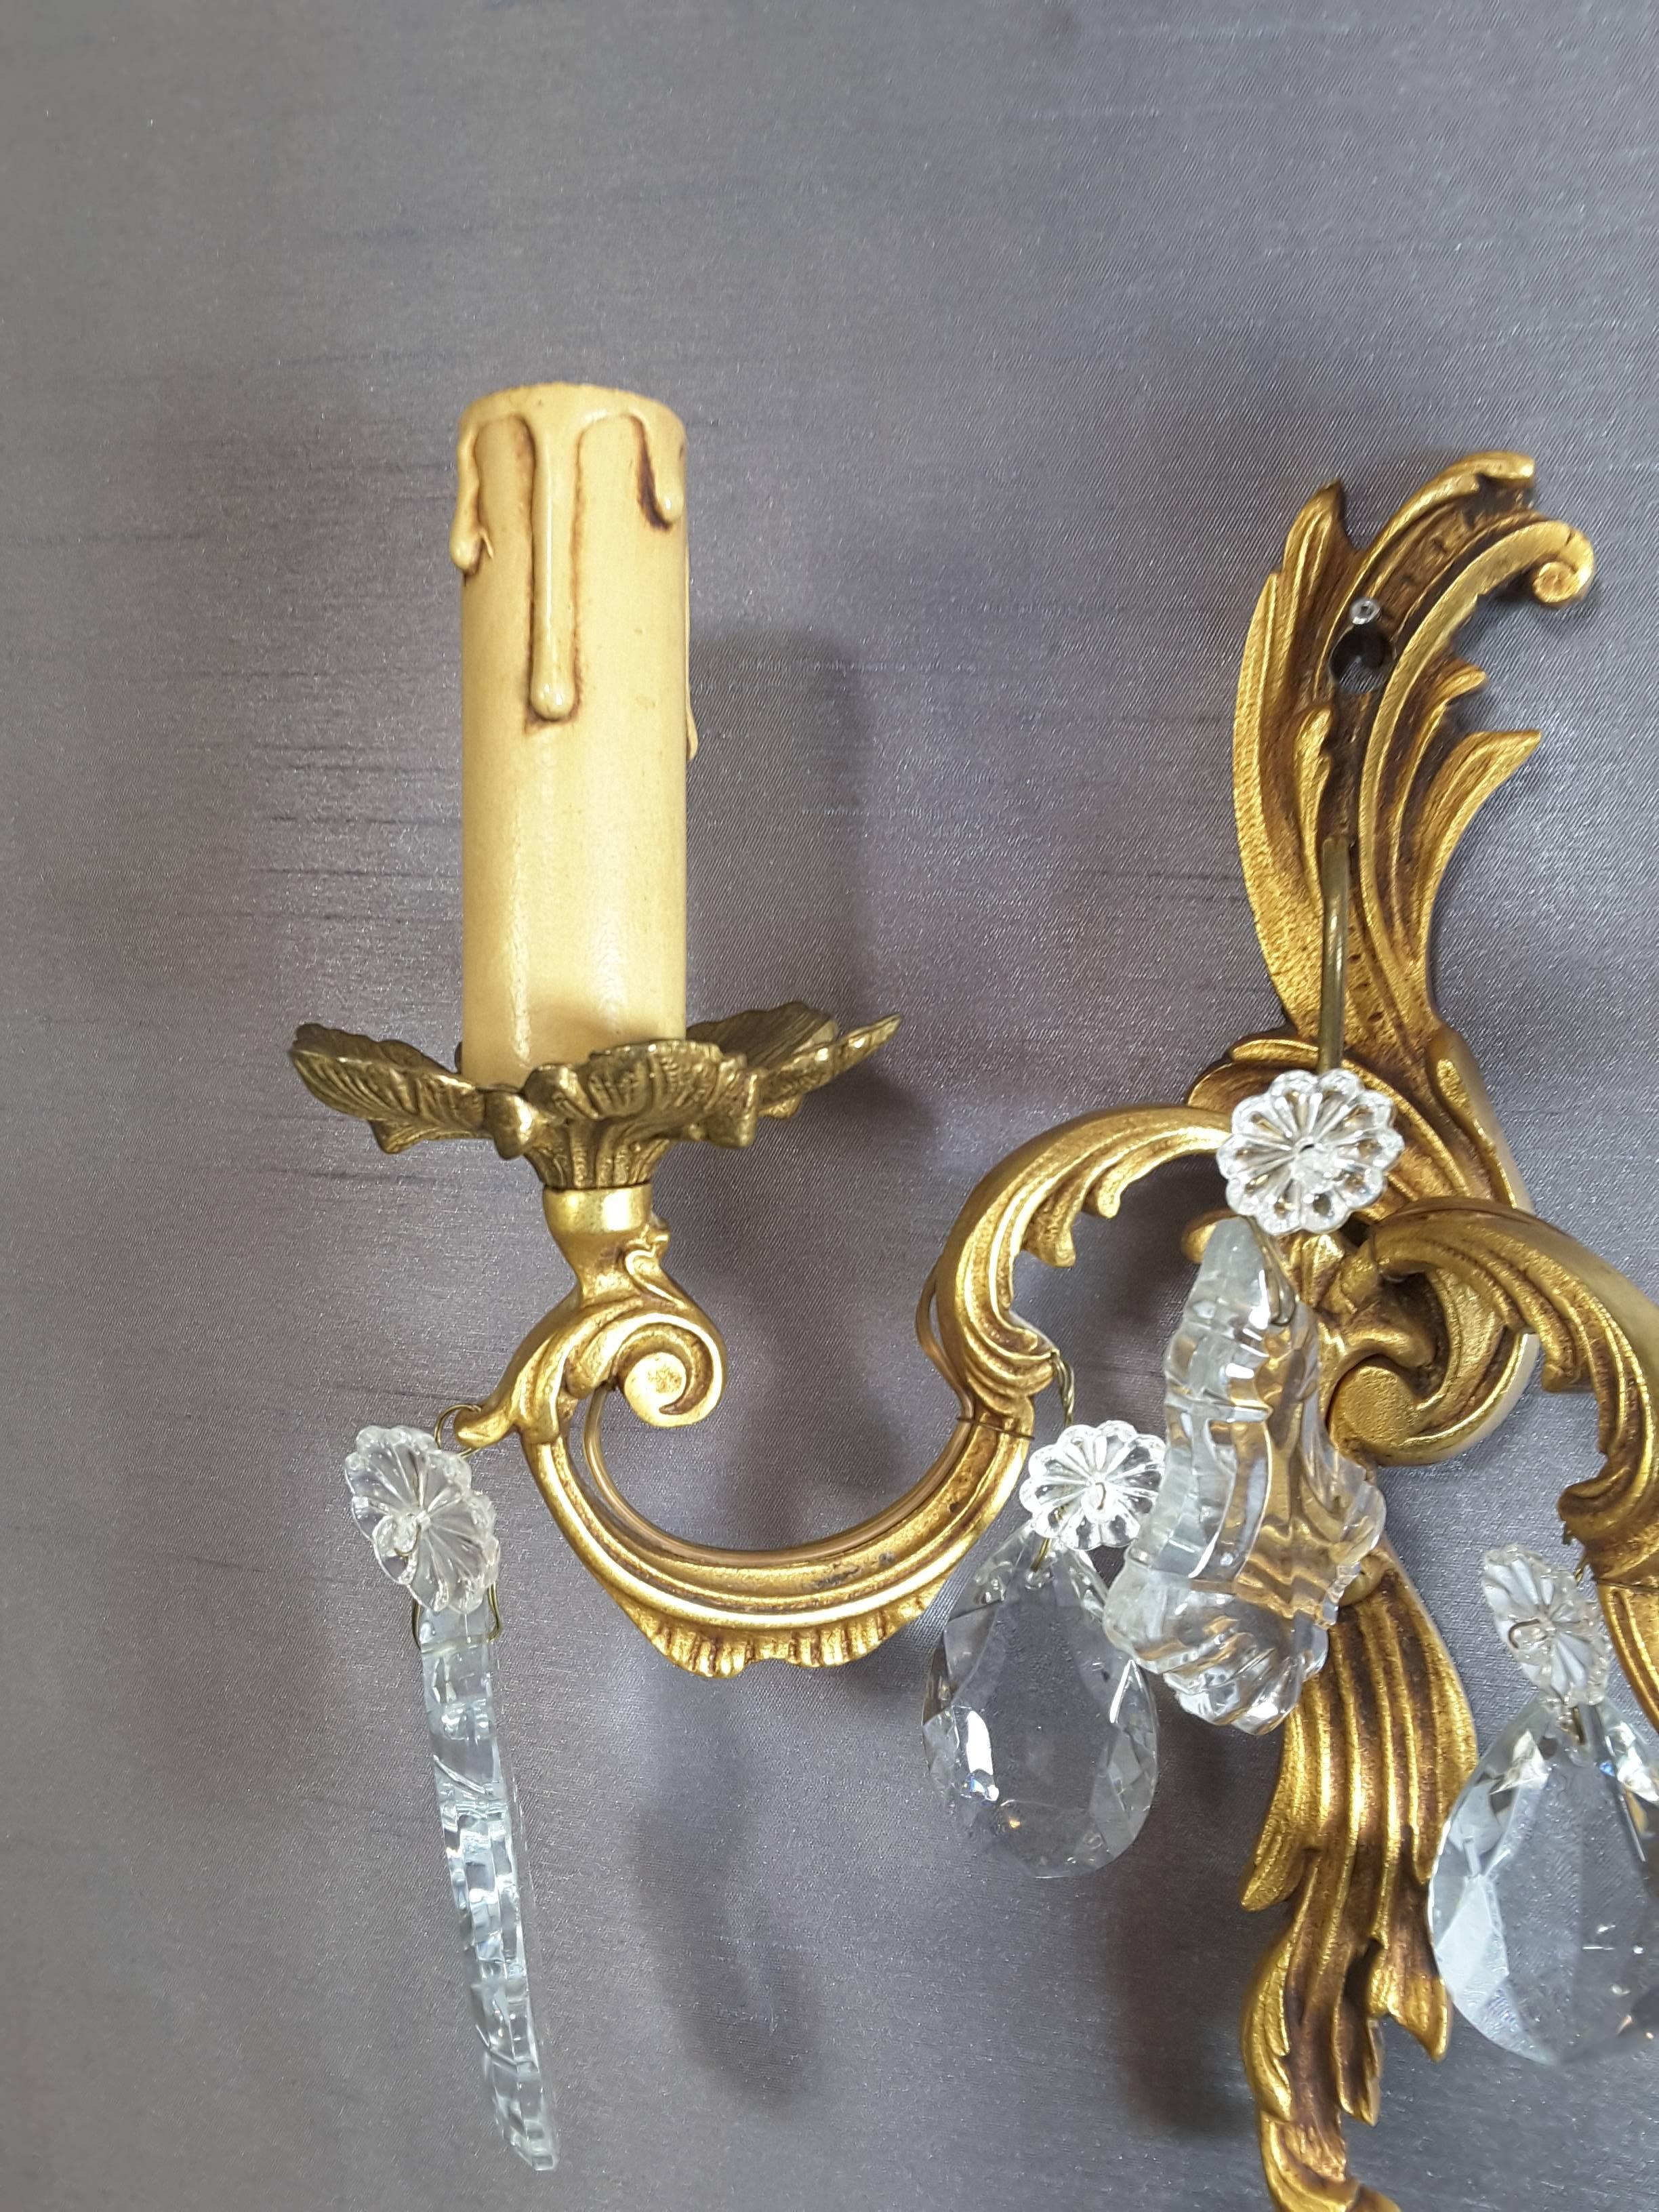 20th Century Pair of Brass/Gilt Wall Sconces with Floral Crystals